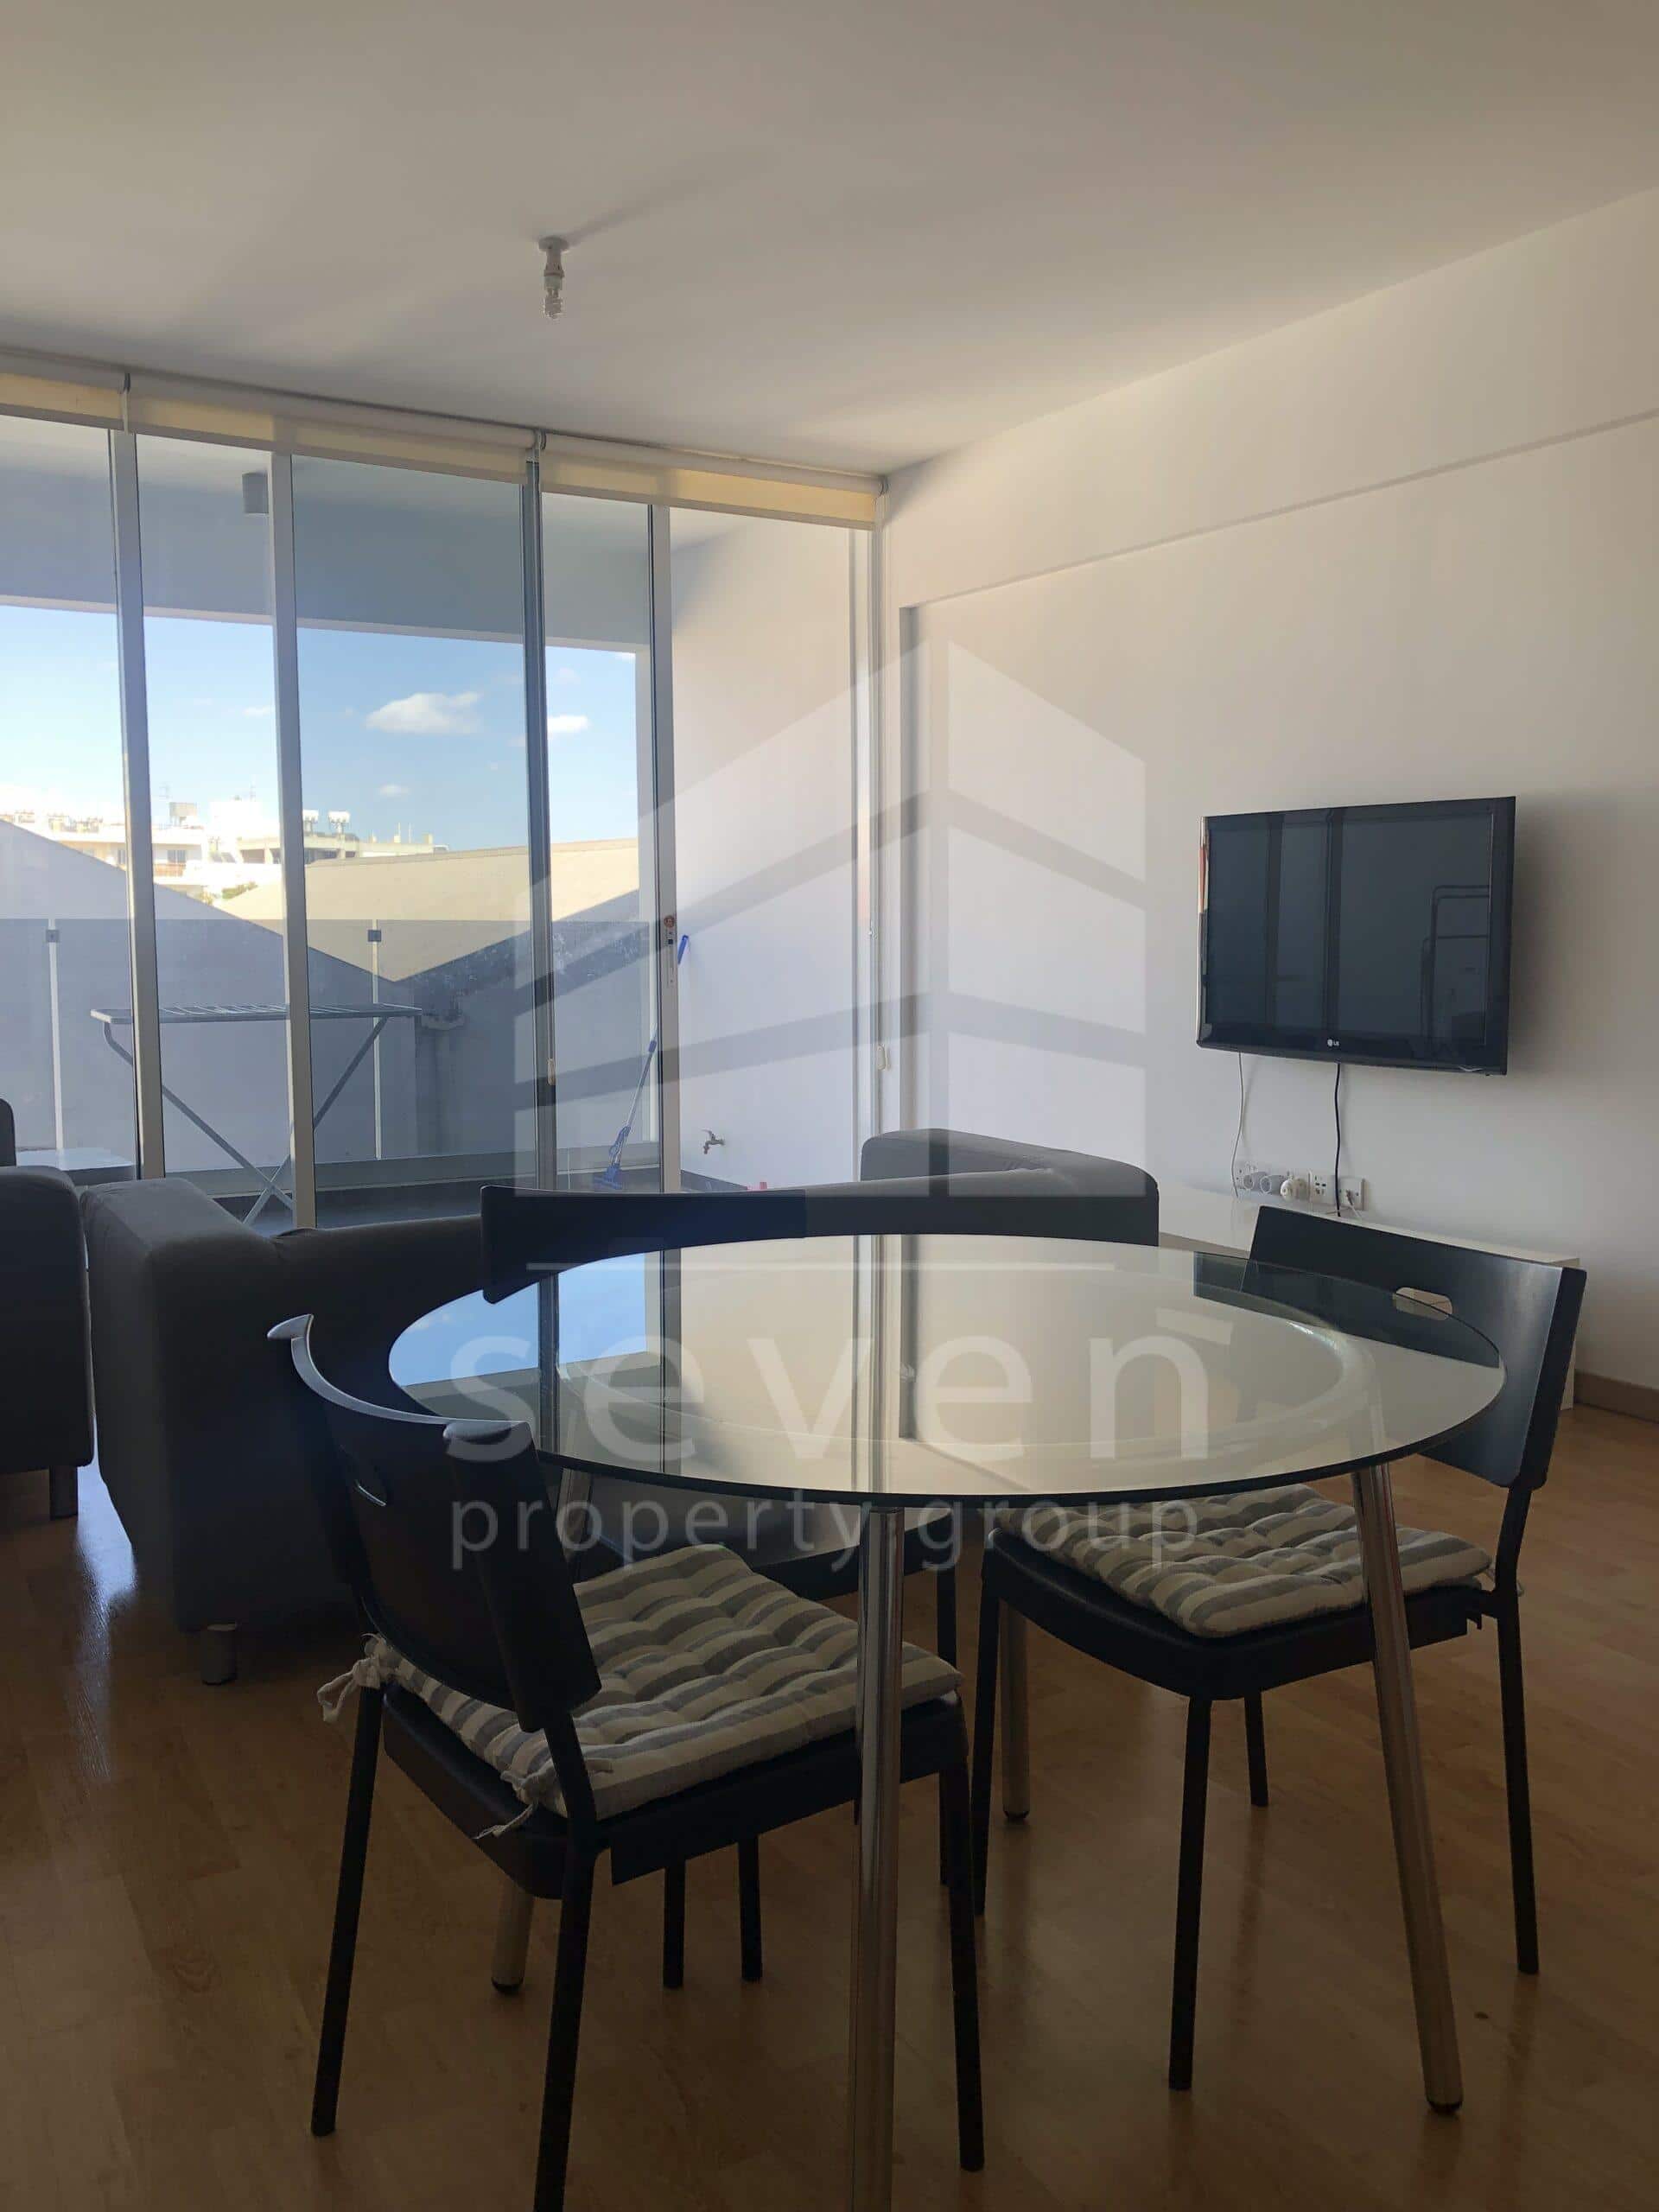 TWO BEDROOM APARTMENT FOR RENT IN CHRYSOPOLITISSA